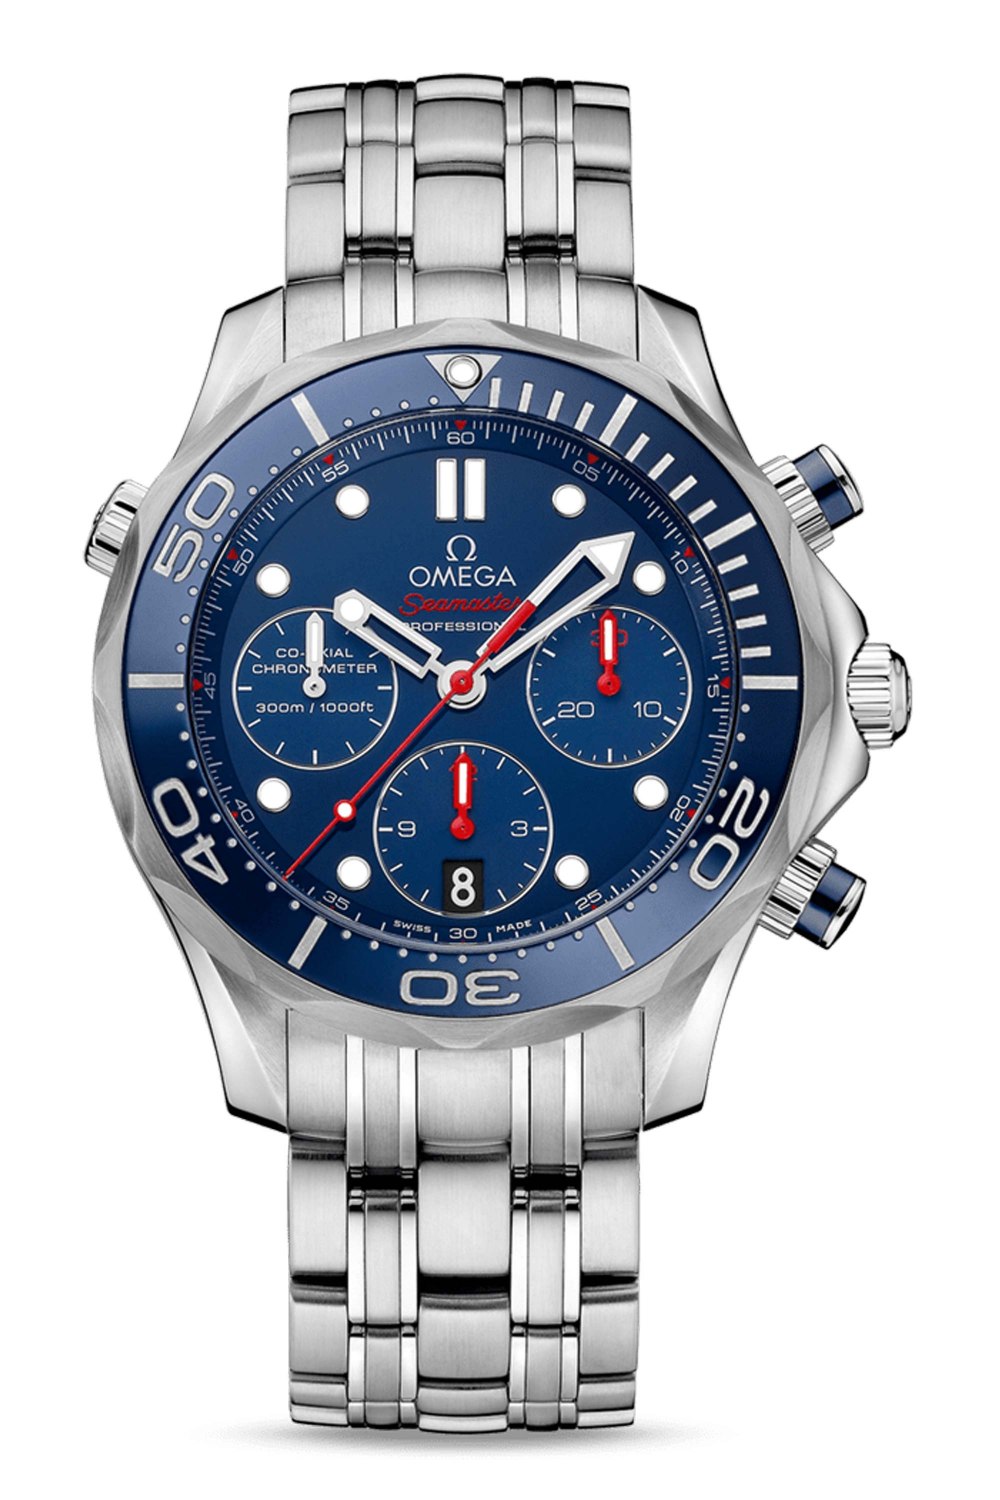 OMEGA Seamaster Diver 300m Co-Axial Chronograph 44mm 212.30.44.50.03.001